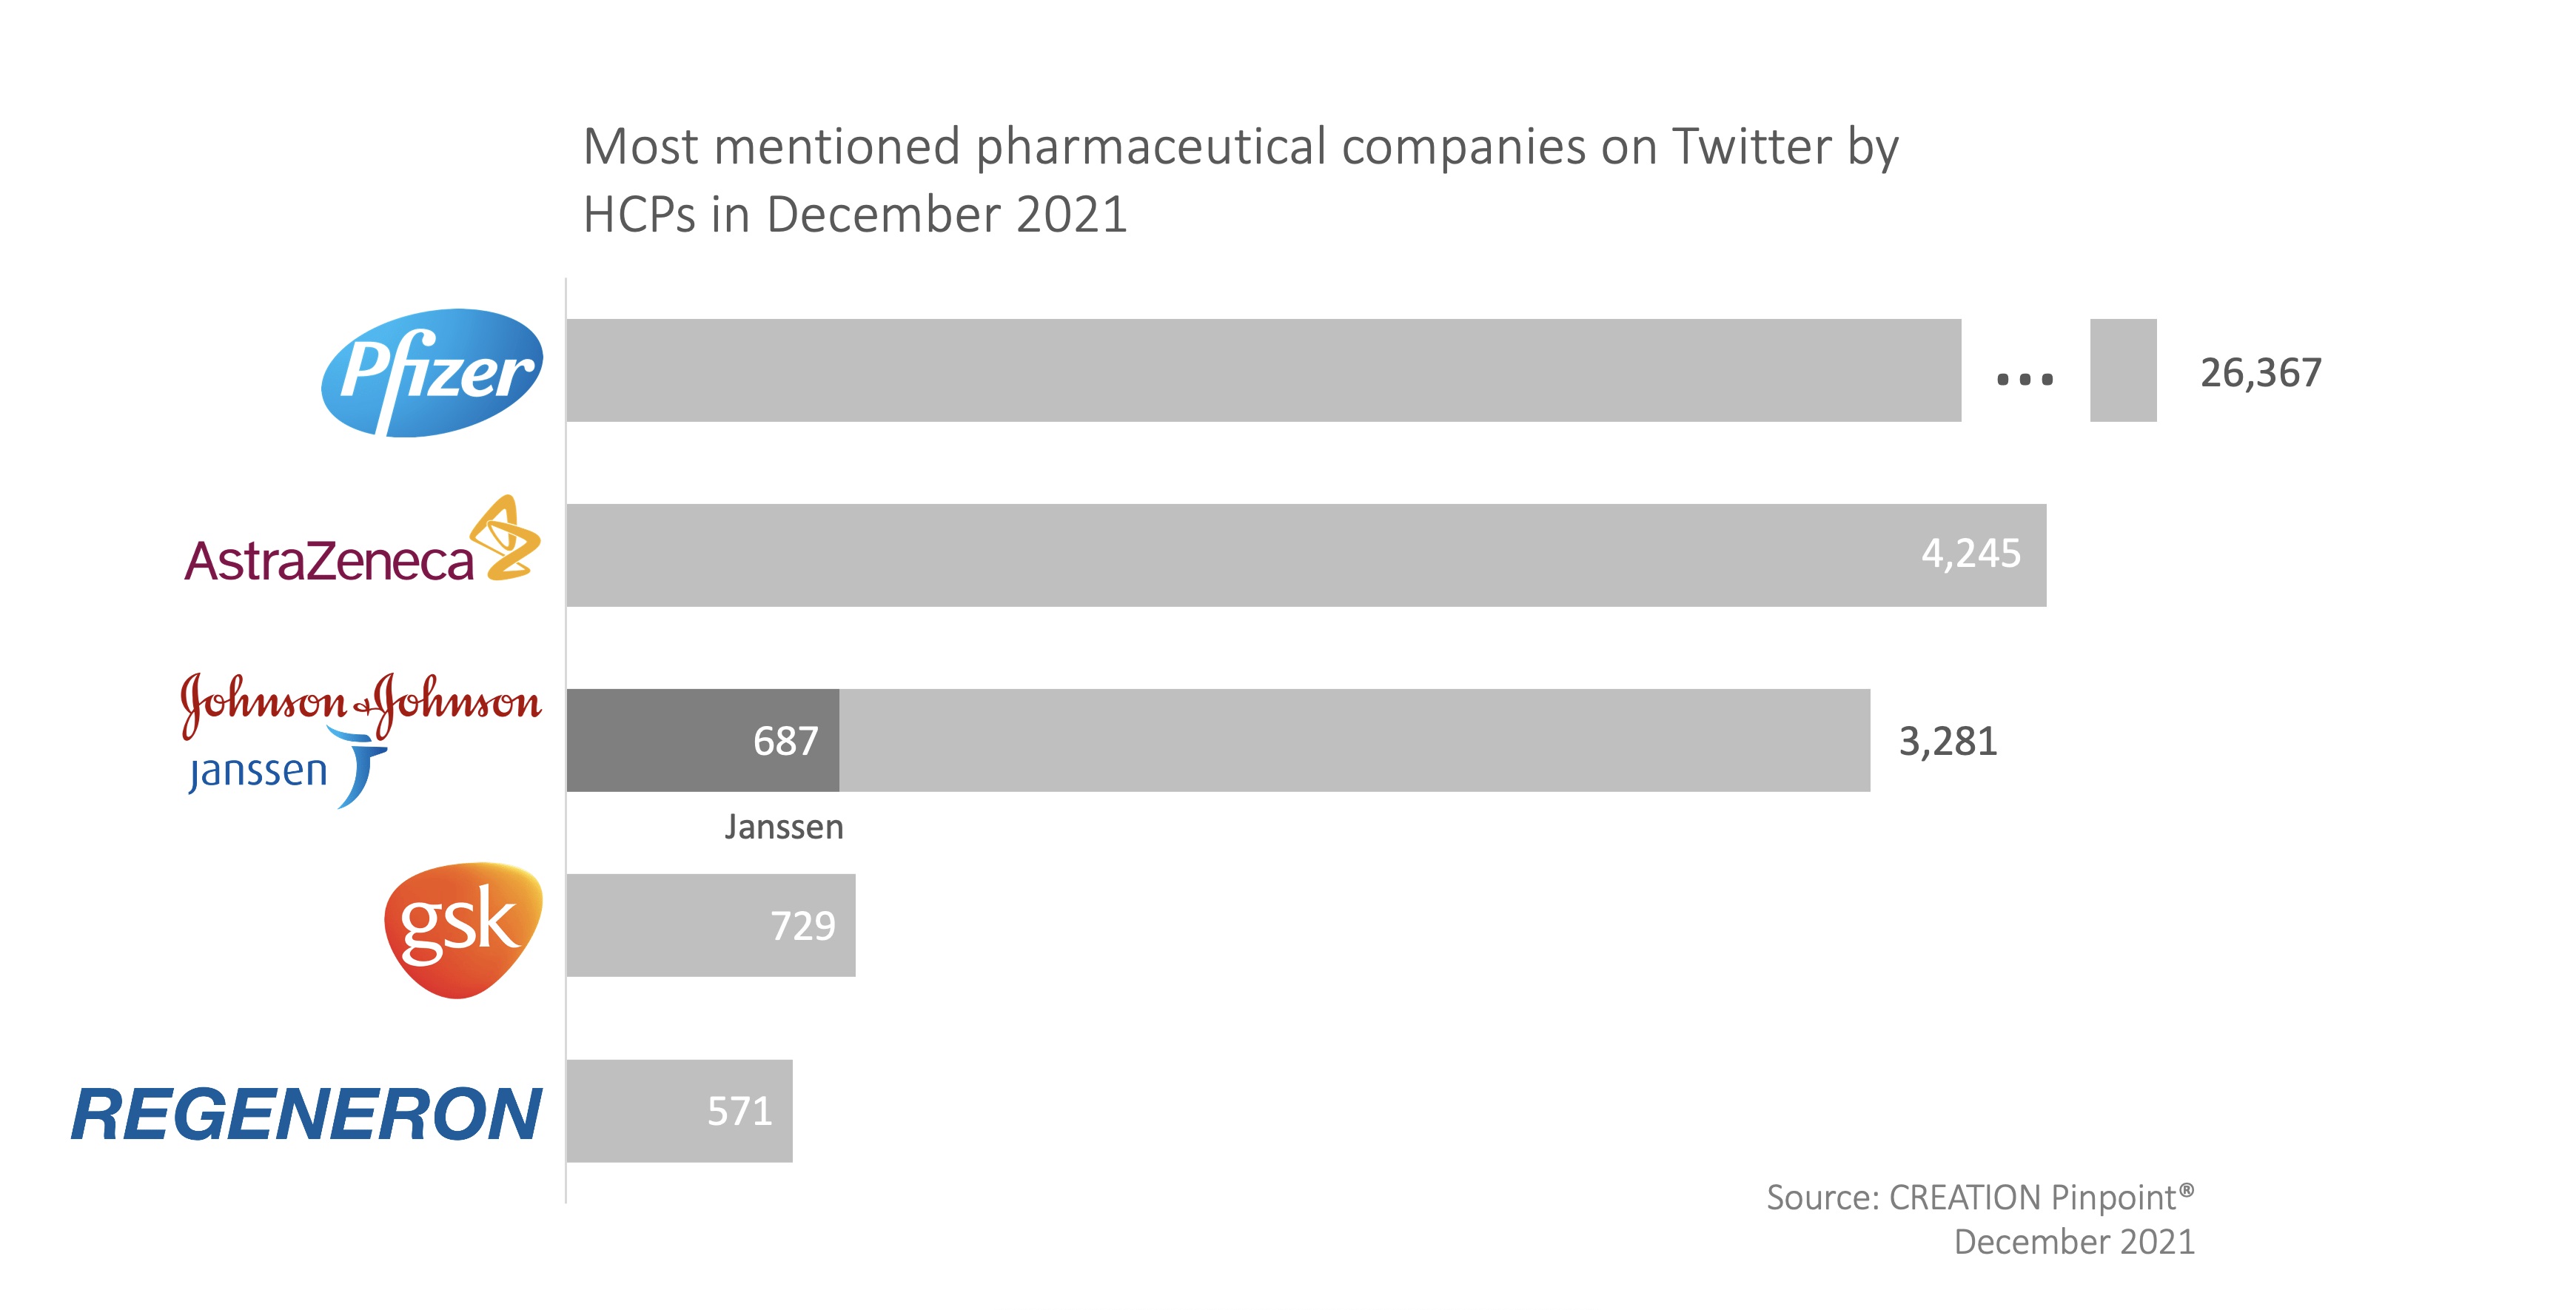 An image of a graph showing the most mentioned pharmaceutical companies on Twitter by HCPs in December 2021